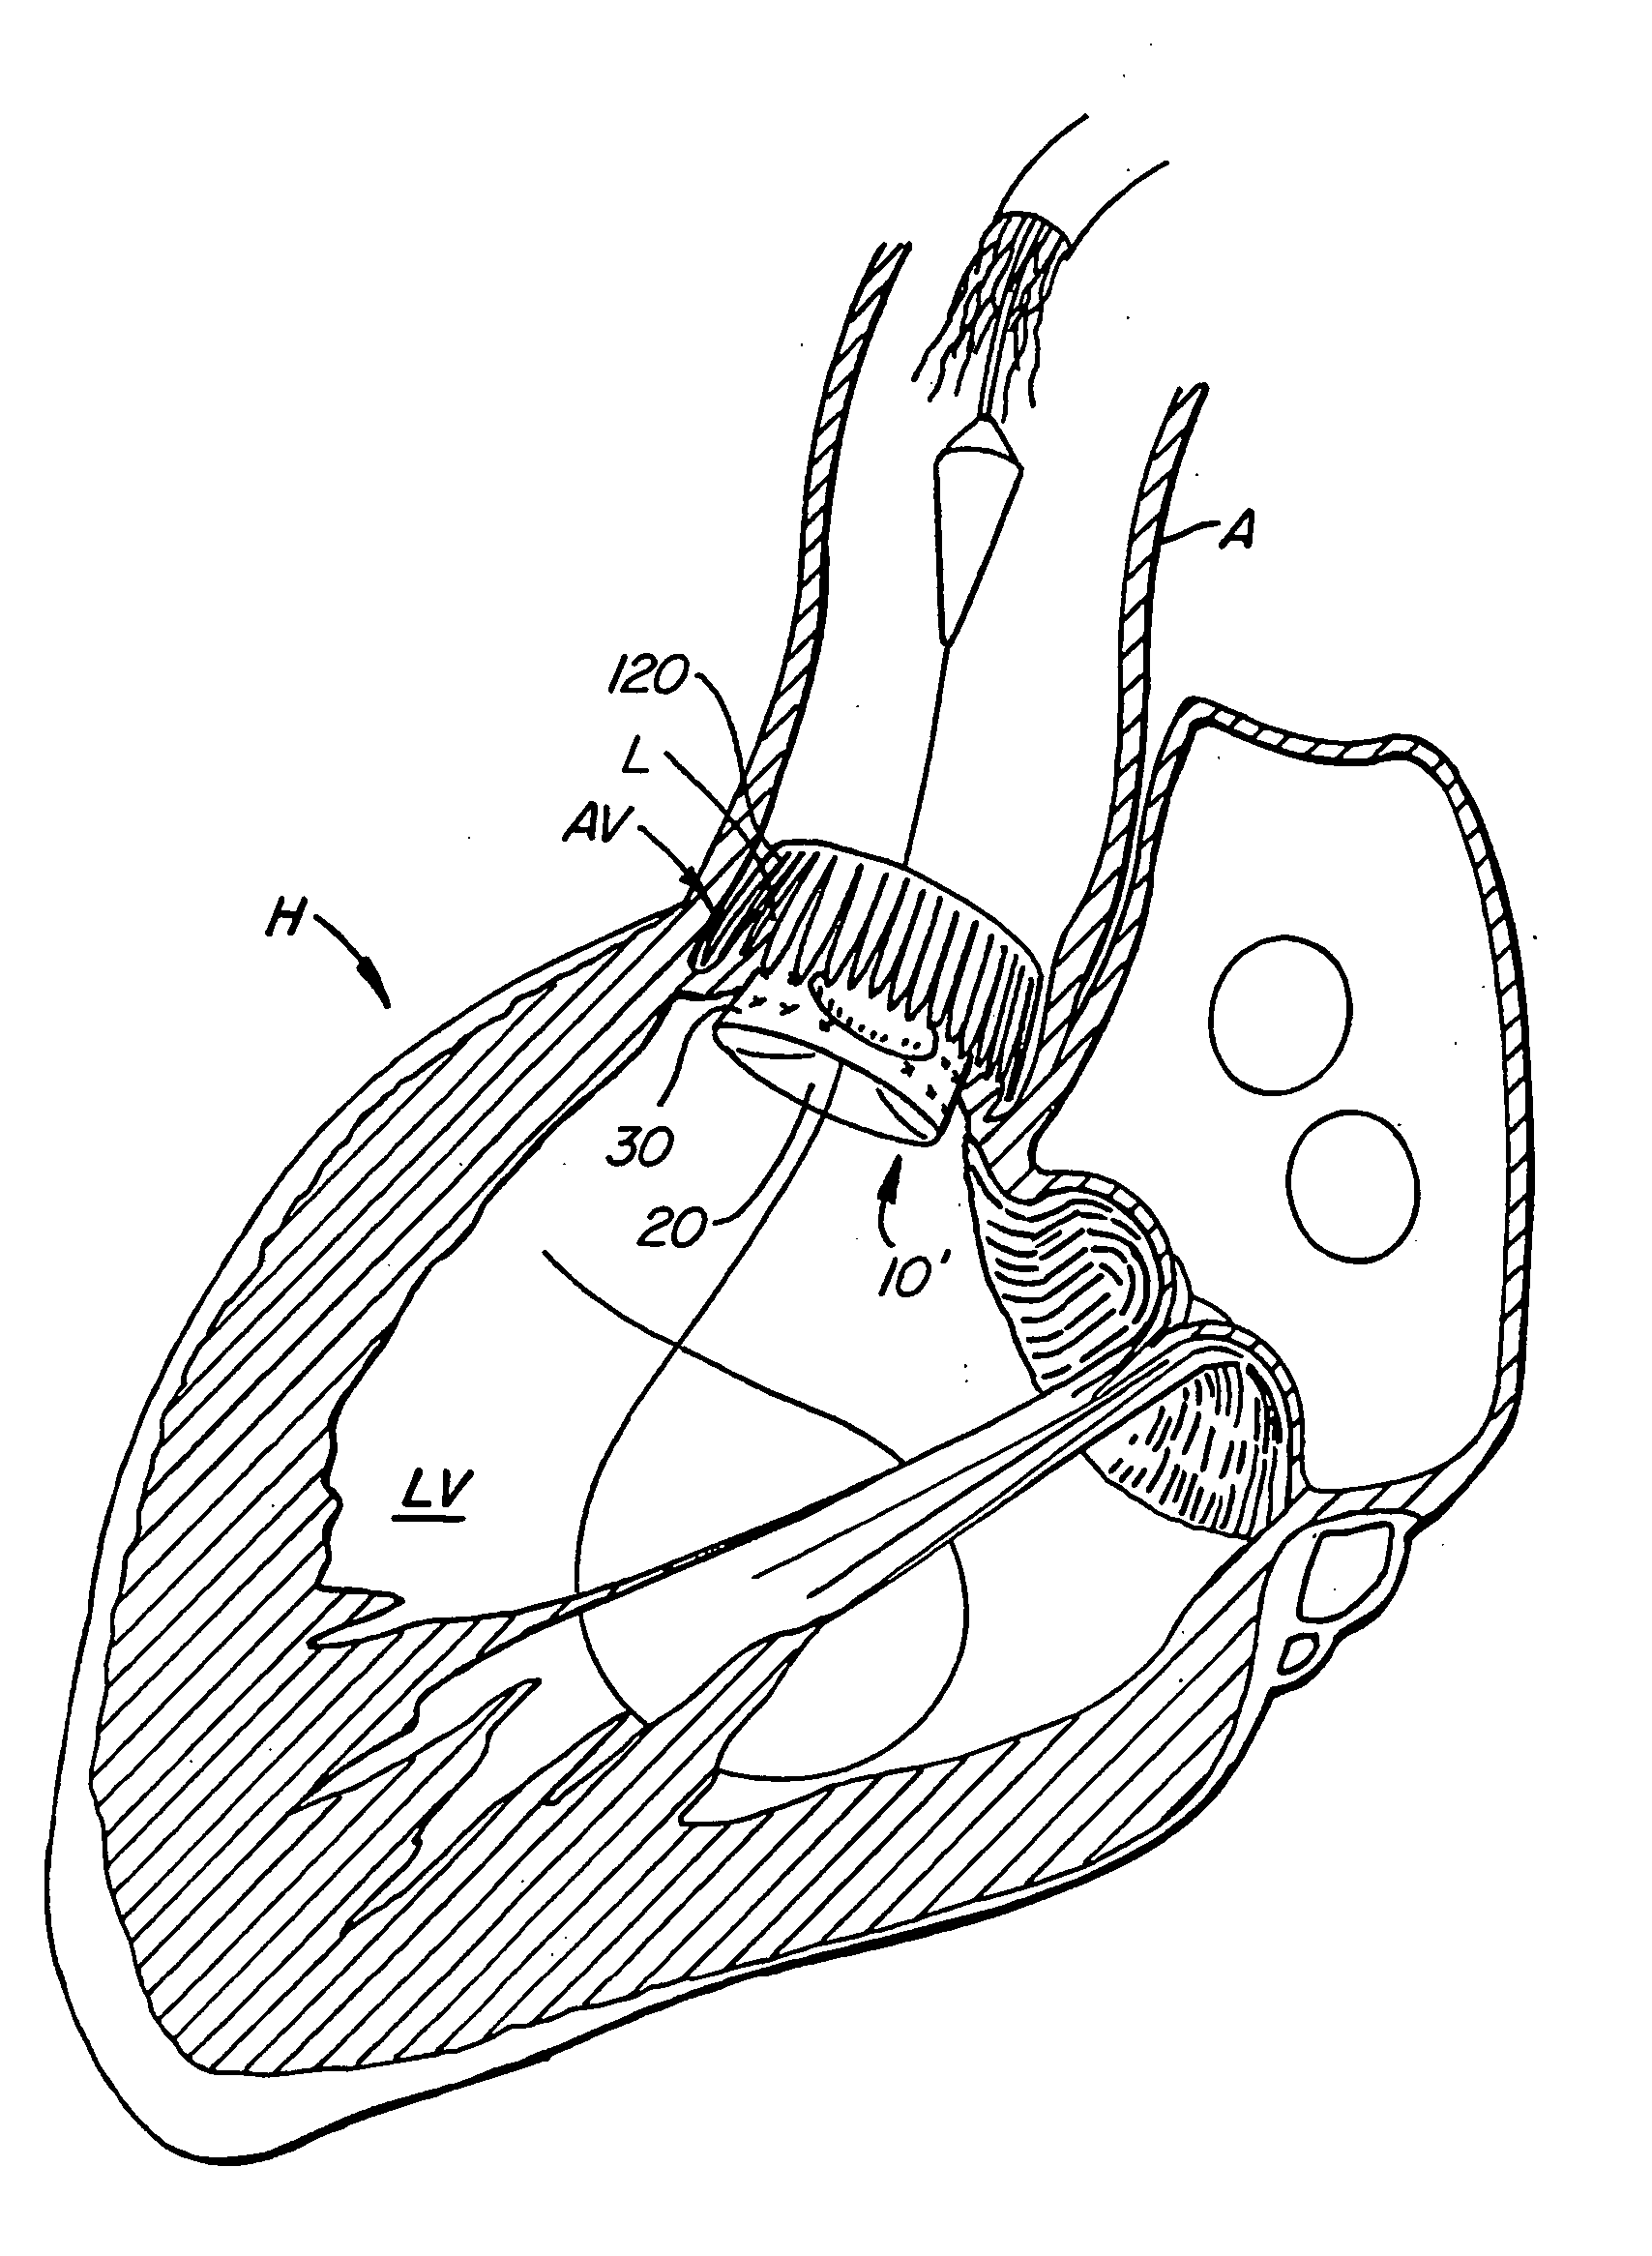 Repositionable heart valve and method